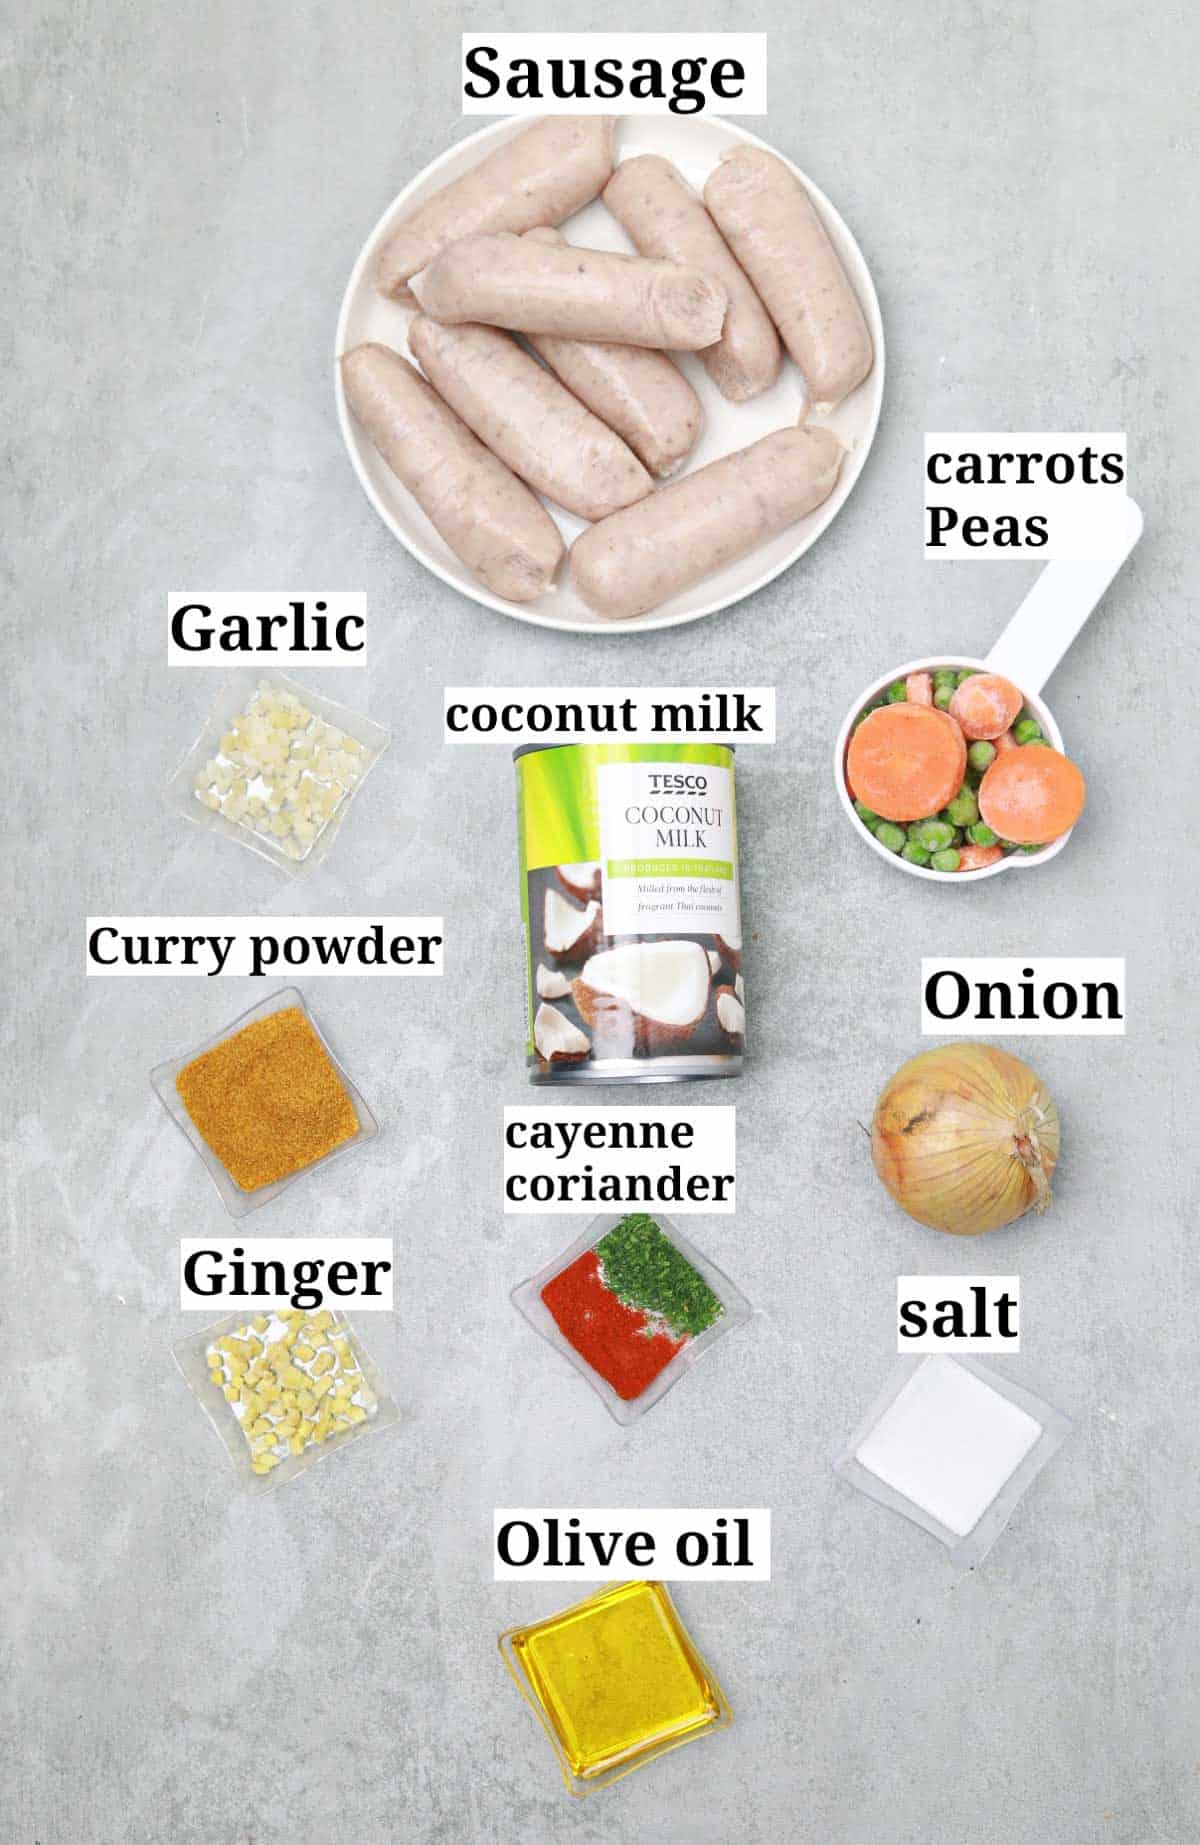 ingredients labelled and displayed.